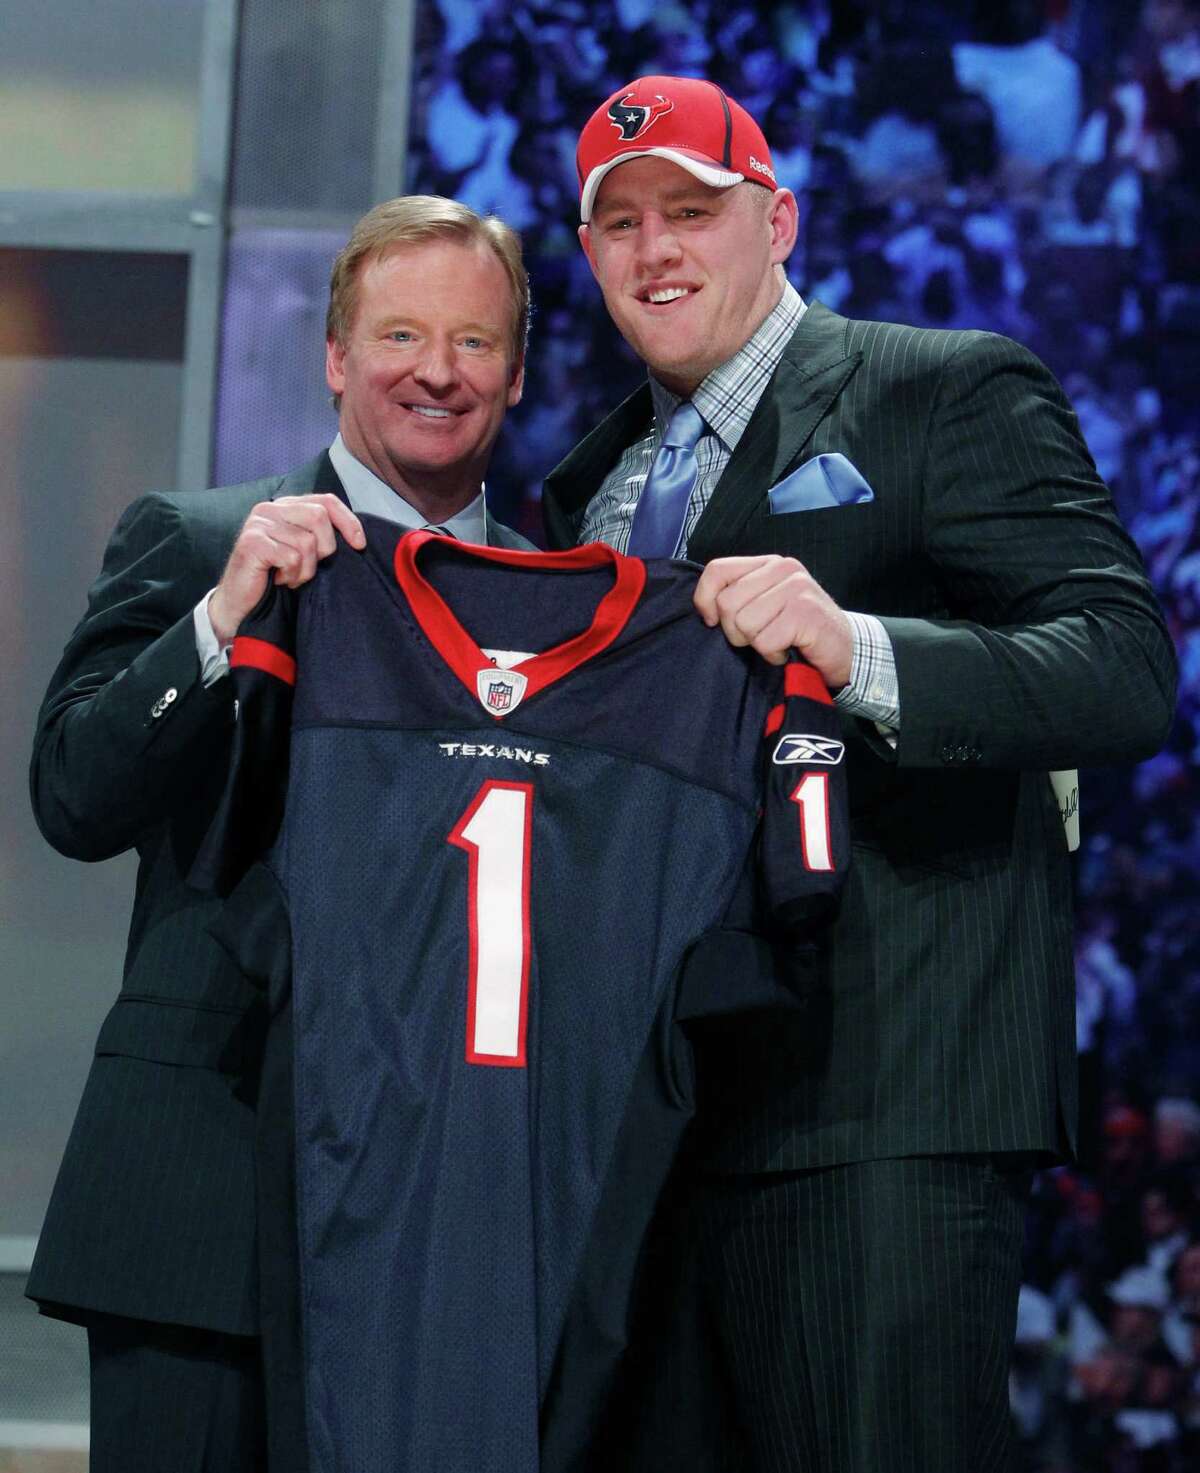 Since posing with NFL commissioner Roger Goodell after being drafted in 2011, Wisconsin's J.J. Watt became the exception to the rule with the Texans as NFL Defensive Player of the Year.